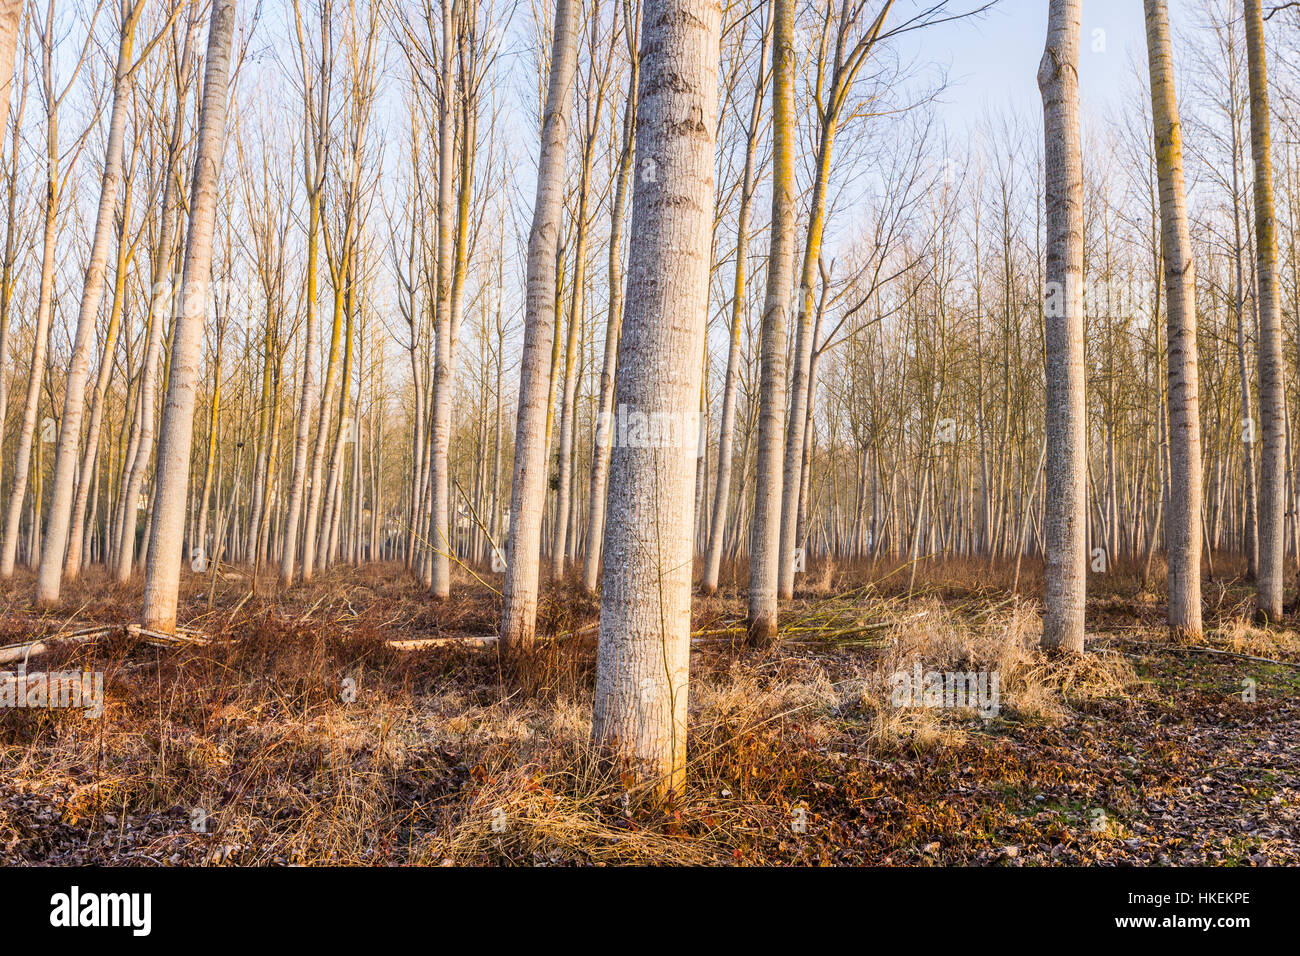 Plantation of plane trees in the Loire Valley, France. Stock Photo